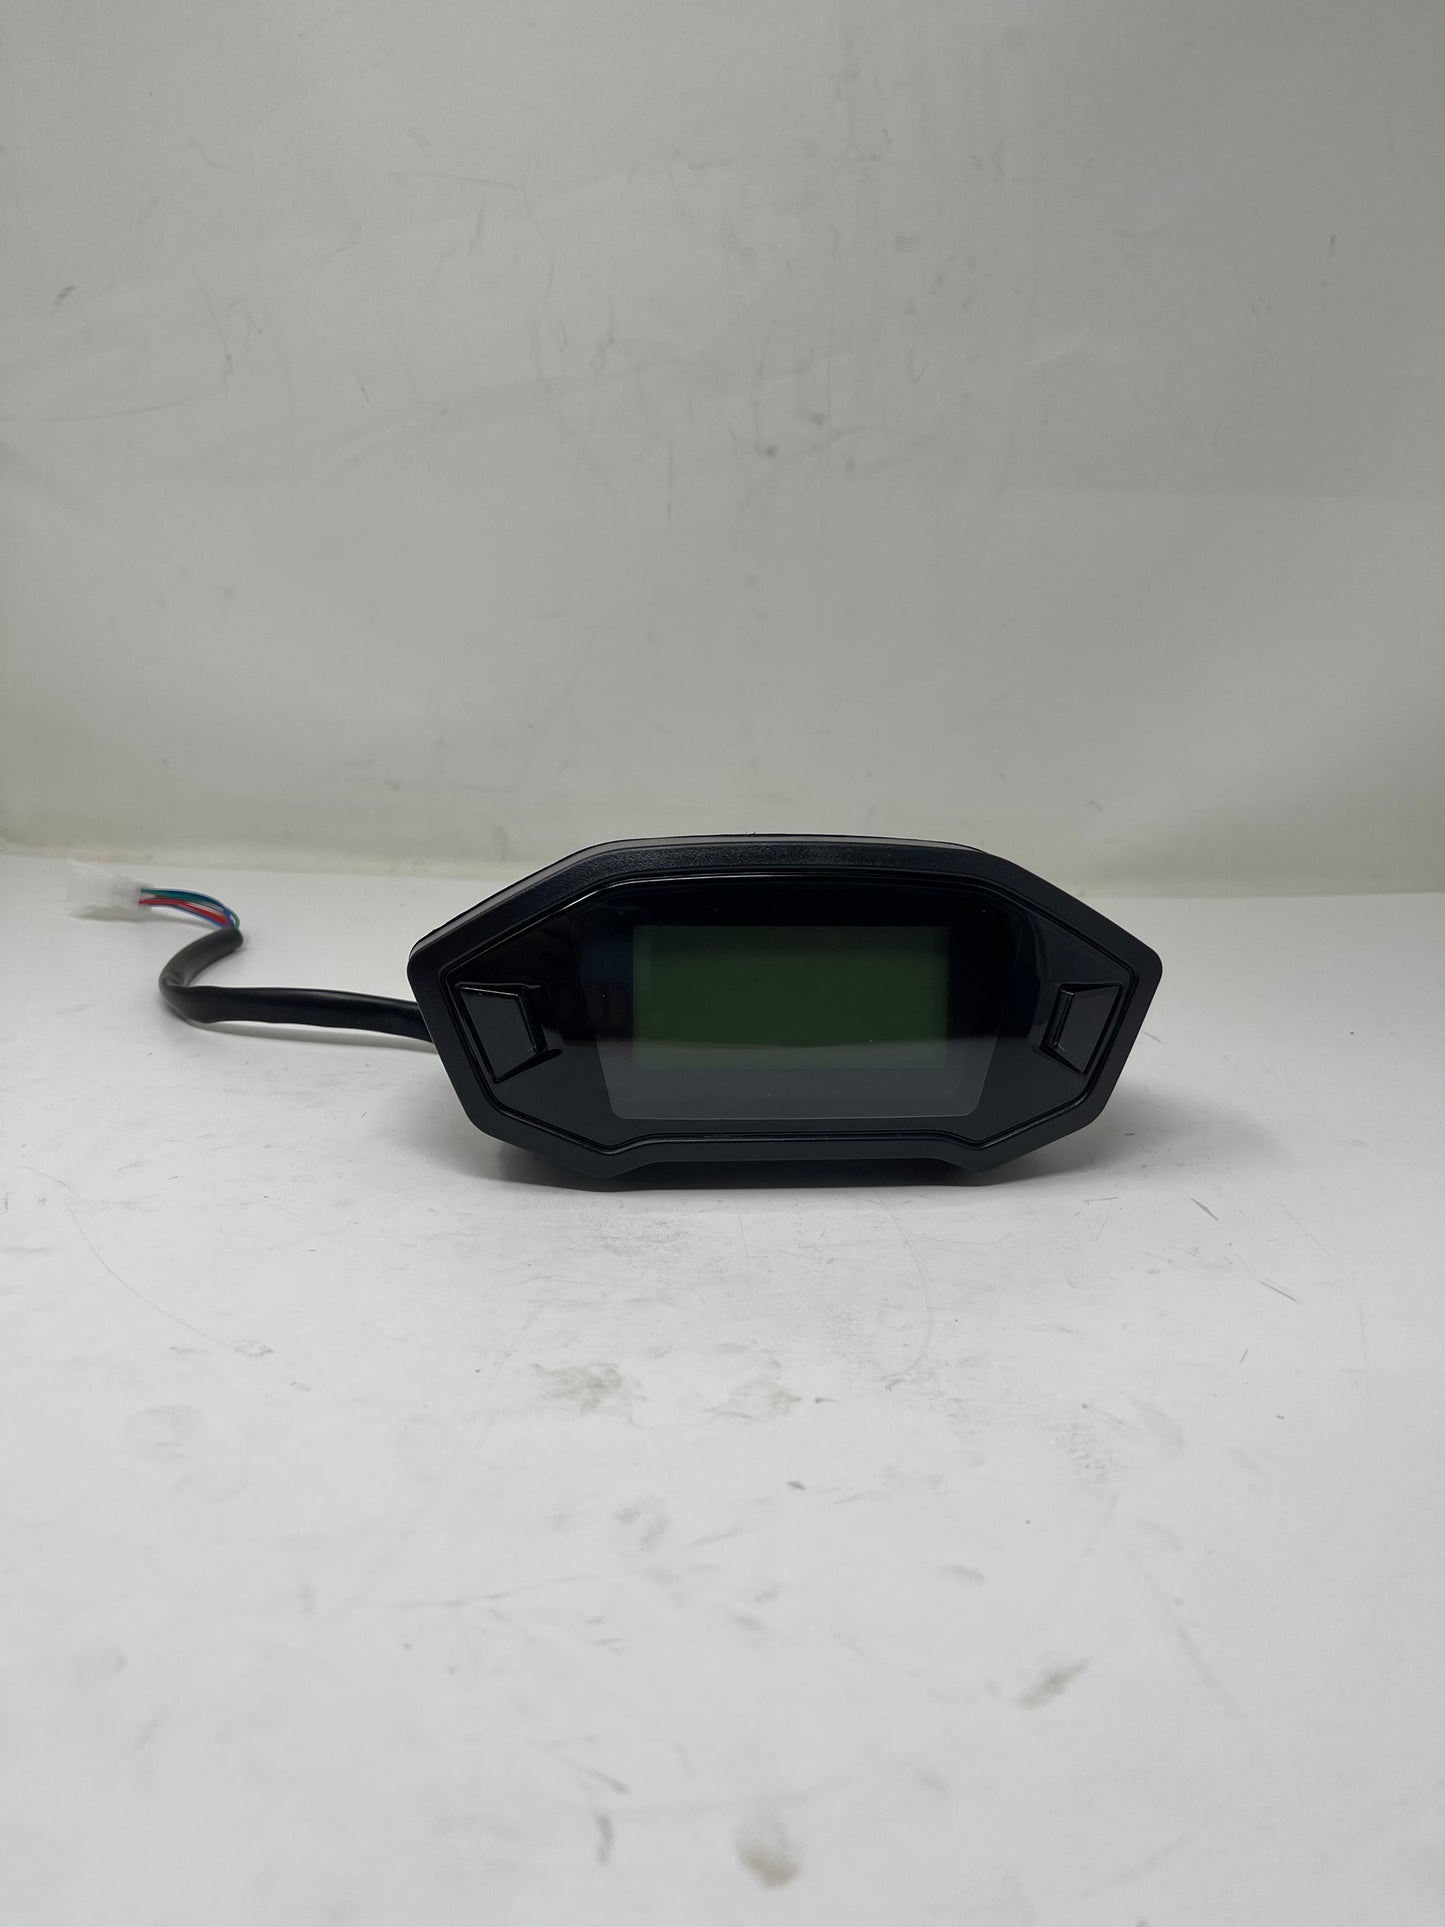 BD578Z speedometer for E-Vader electric motorcycle.